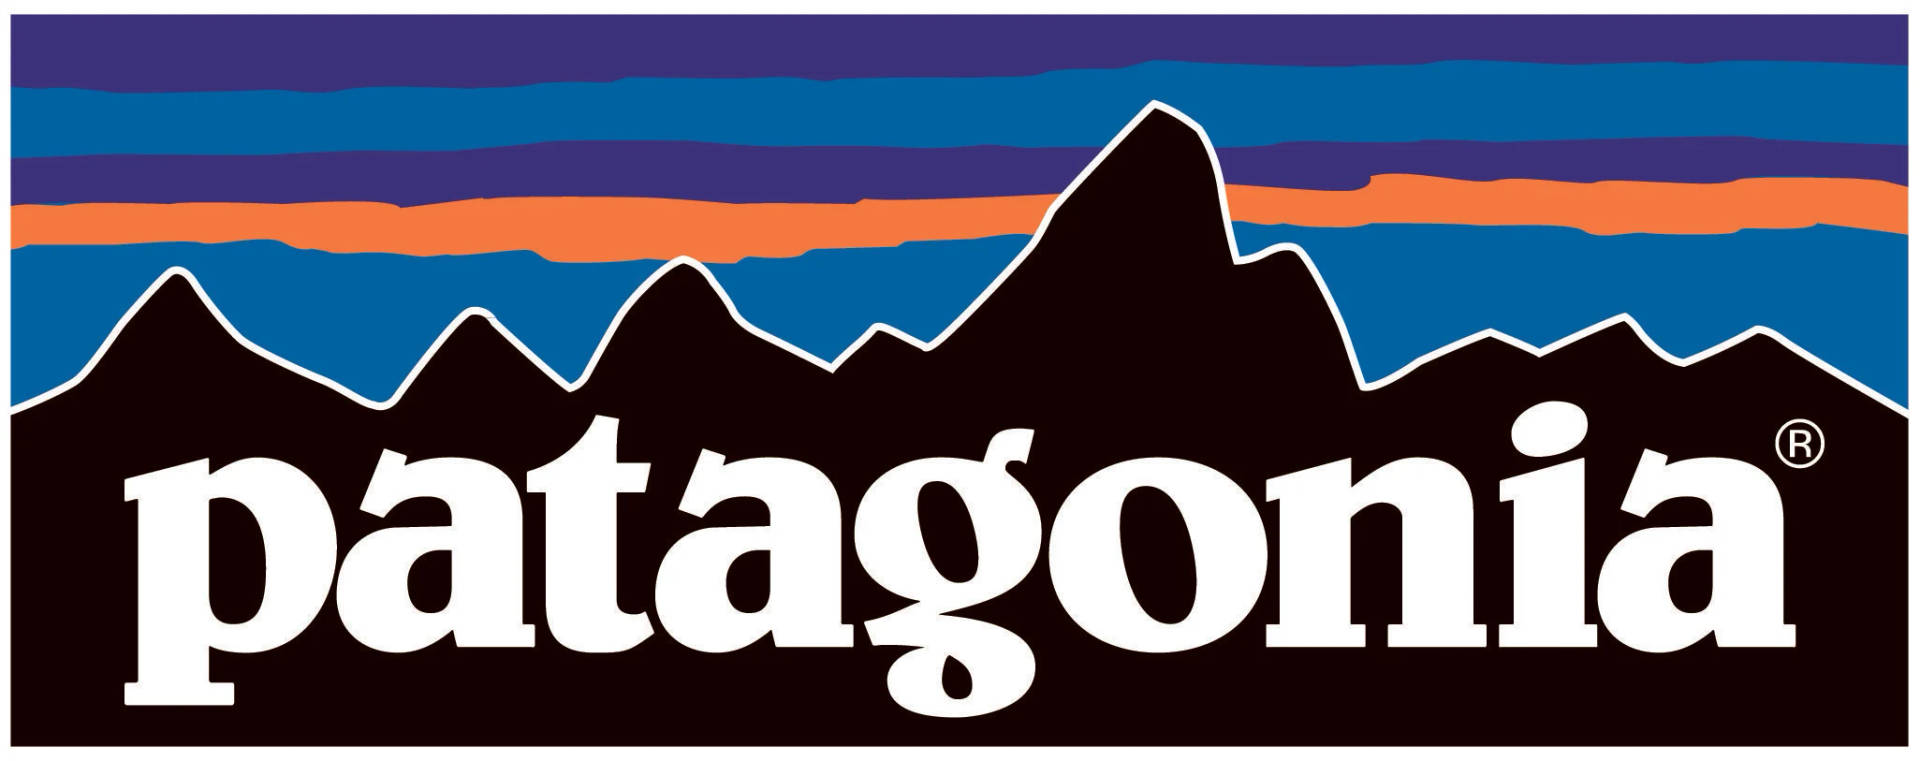 The Iconic Patagonia Brand Logo Background